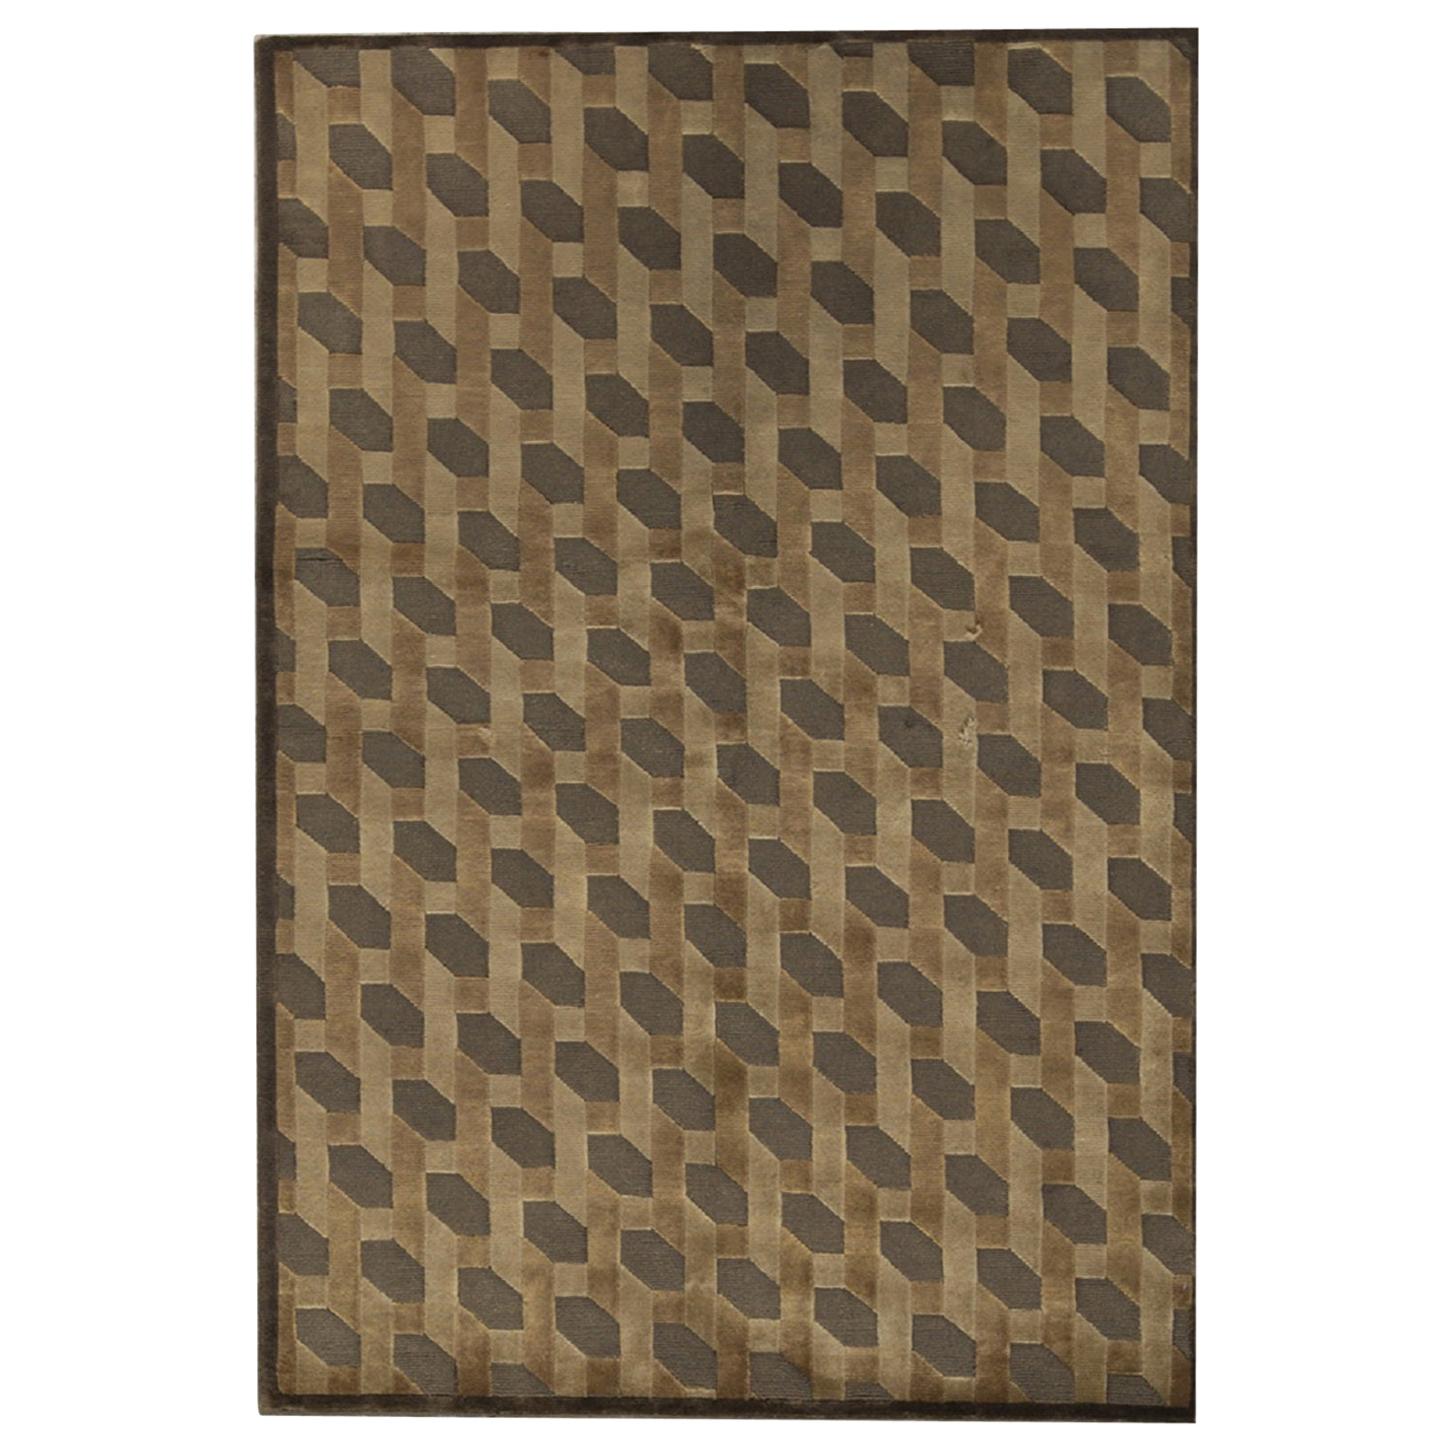 One of a Kind Contemporary Handwoven Wool Area Rug 4'6 x 6'8